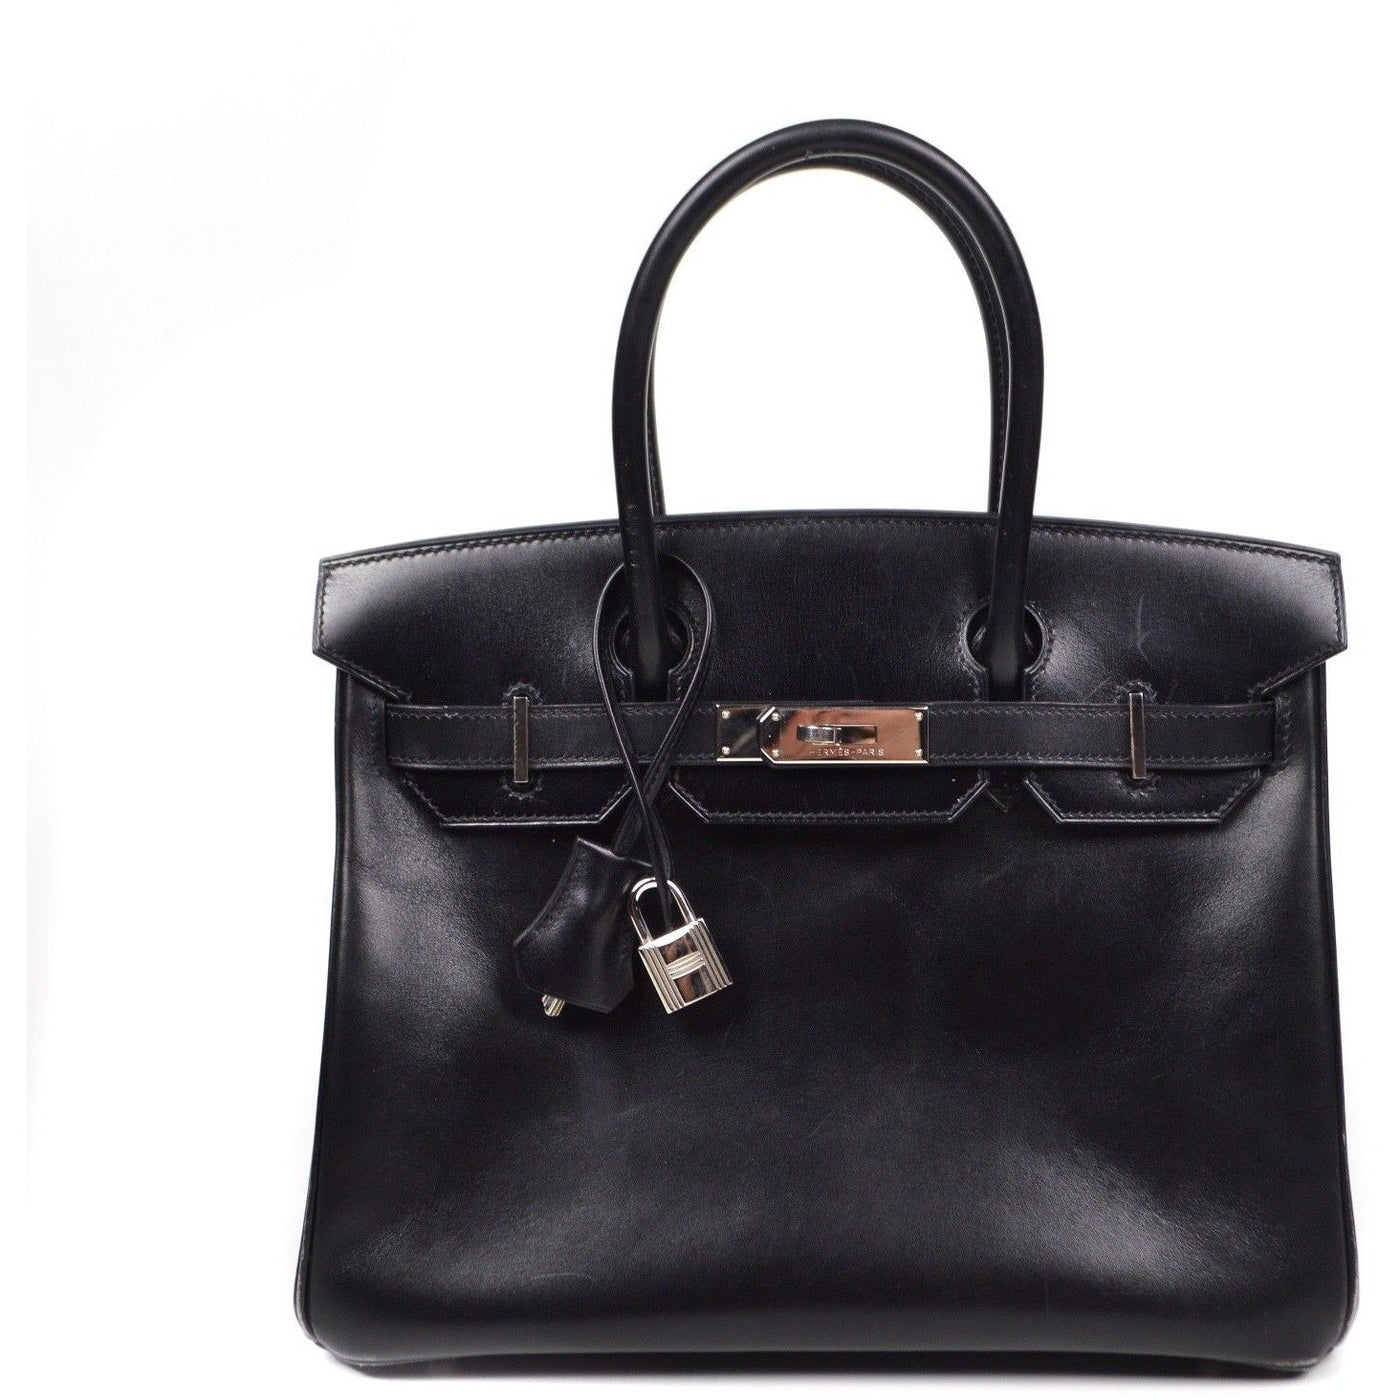 How to Authenticate a Hermes Bag when Using Online Luxury Consignment - Luxury Resale Network